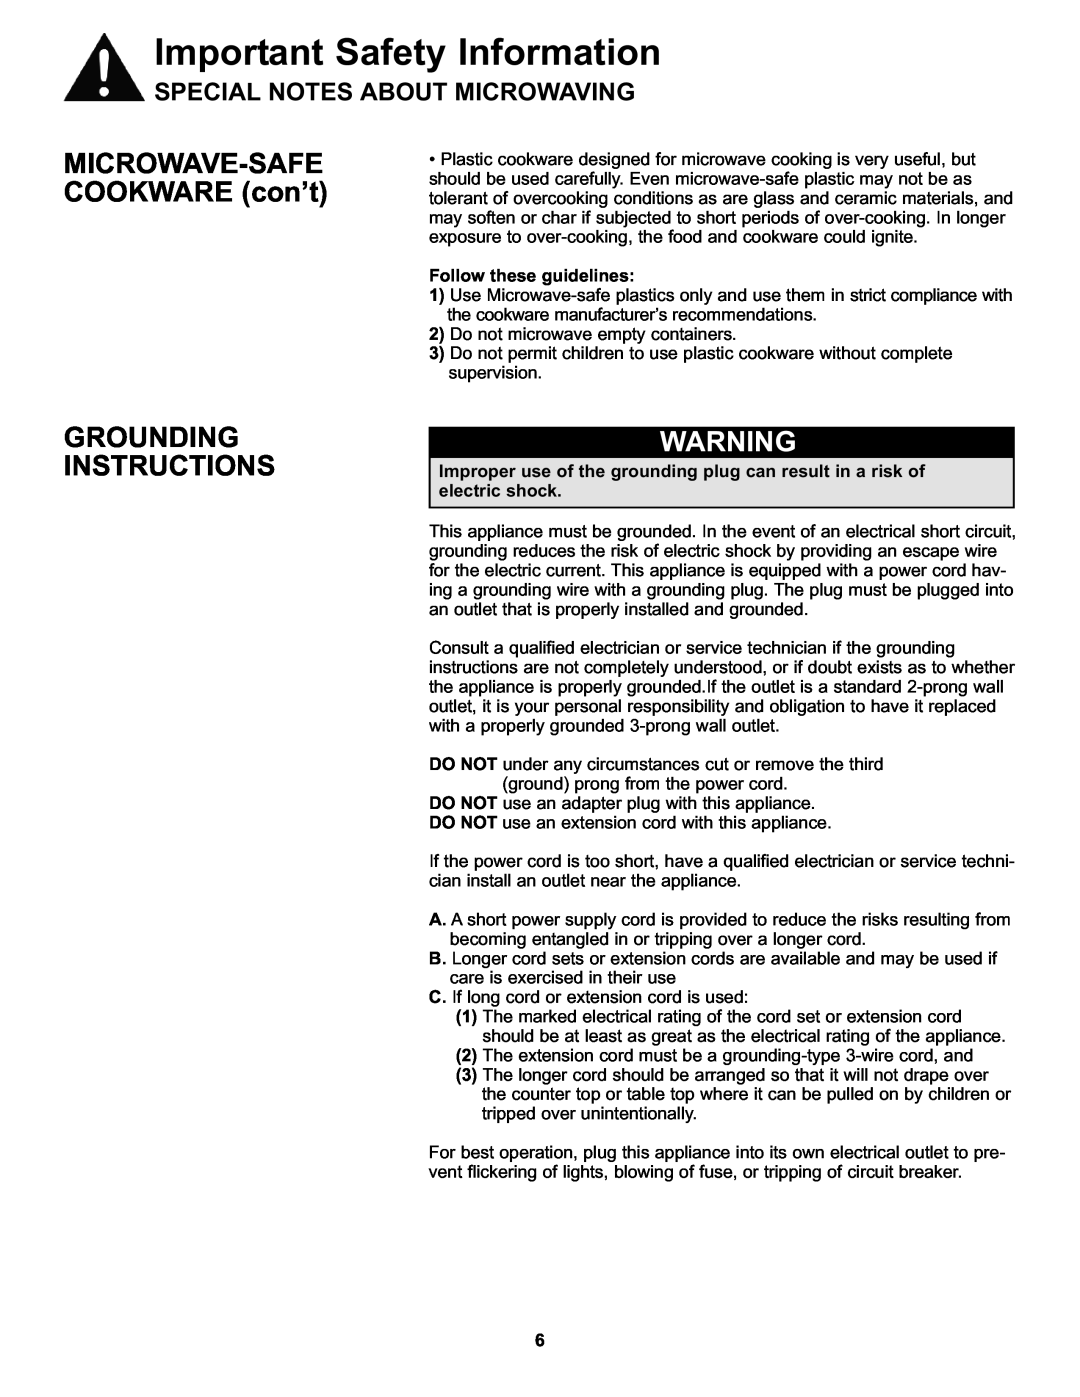 Danby DMW7700WDB, DMW7700BLDB manual MICROWAVE-SAFECOOKWARE con’t, Grounding Instructions, Important Safety Information 